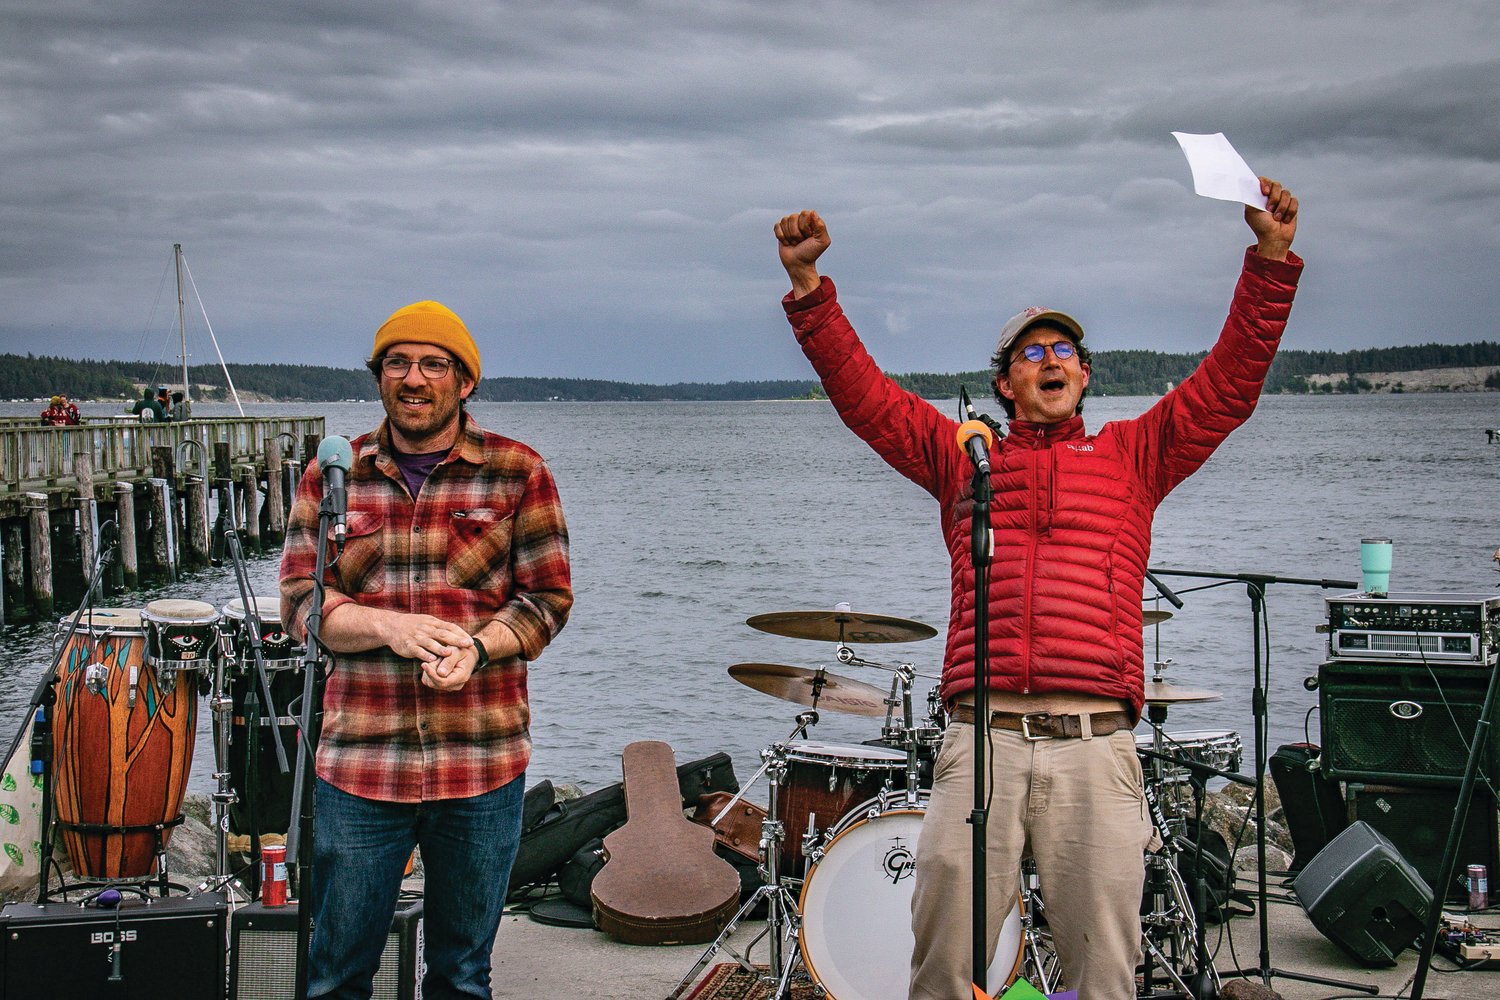 Race Marshal Jesse Weigle and Race Boss Daniel Evans of Seventy 48 and Race to Alaska celebrate following a successful outing on the water, with a record number of participants this year.